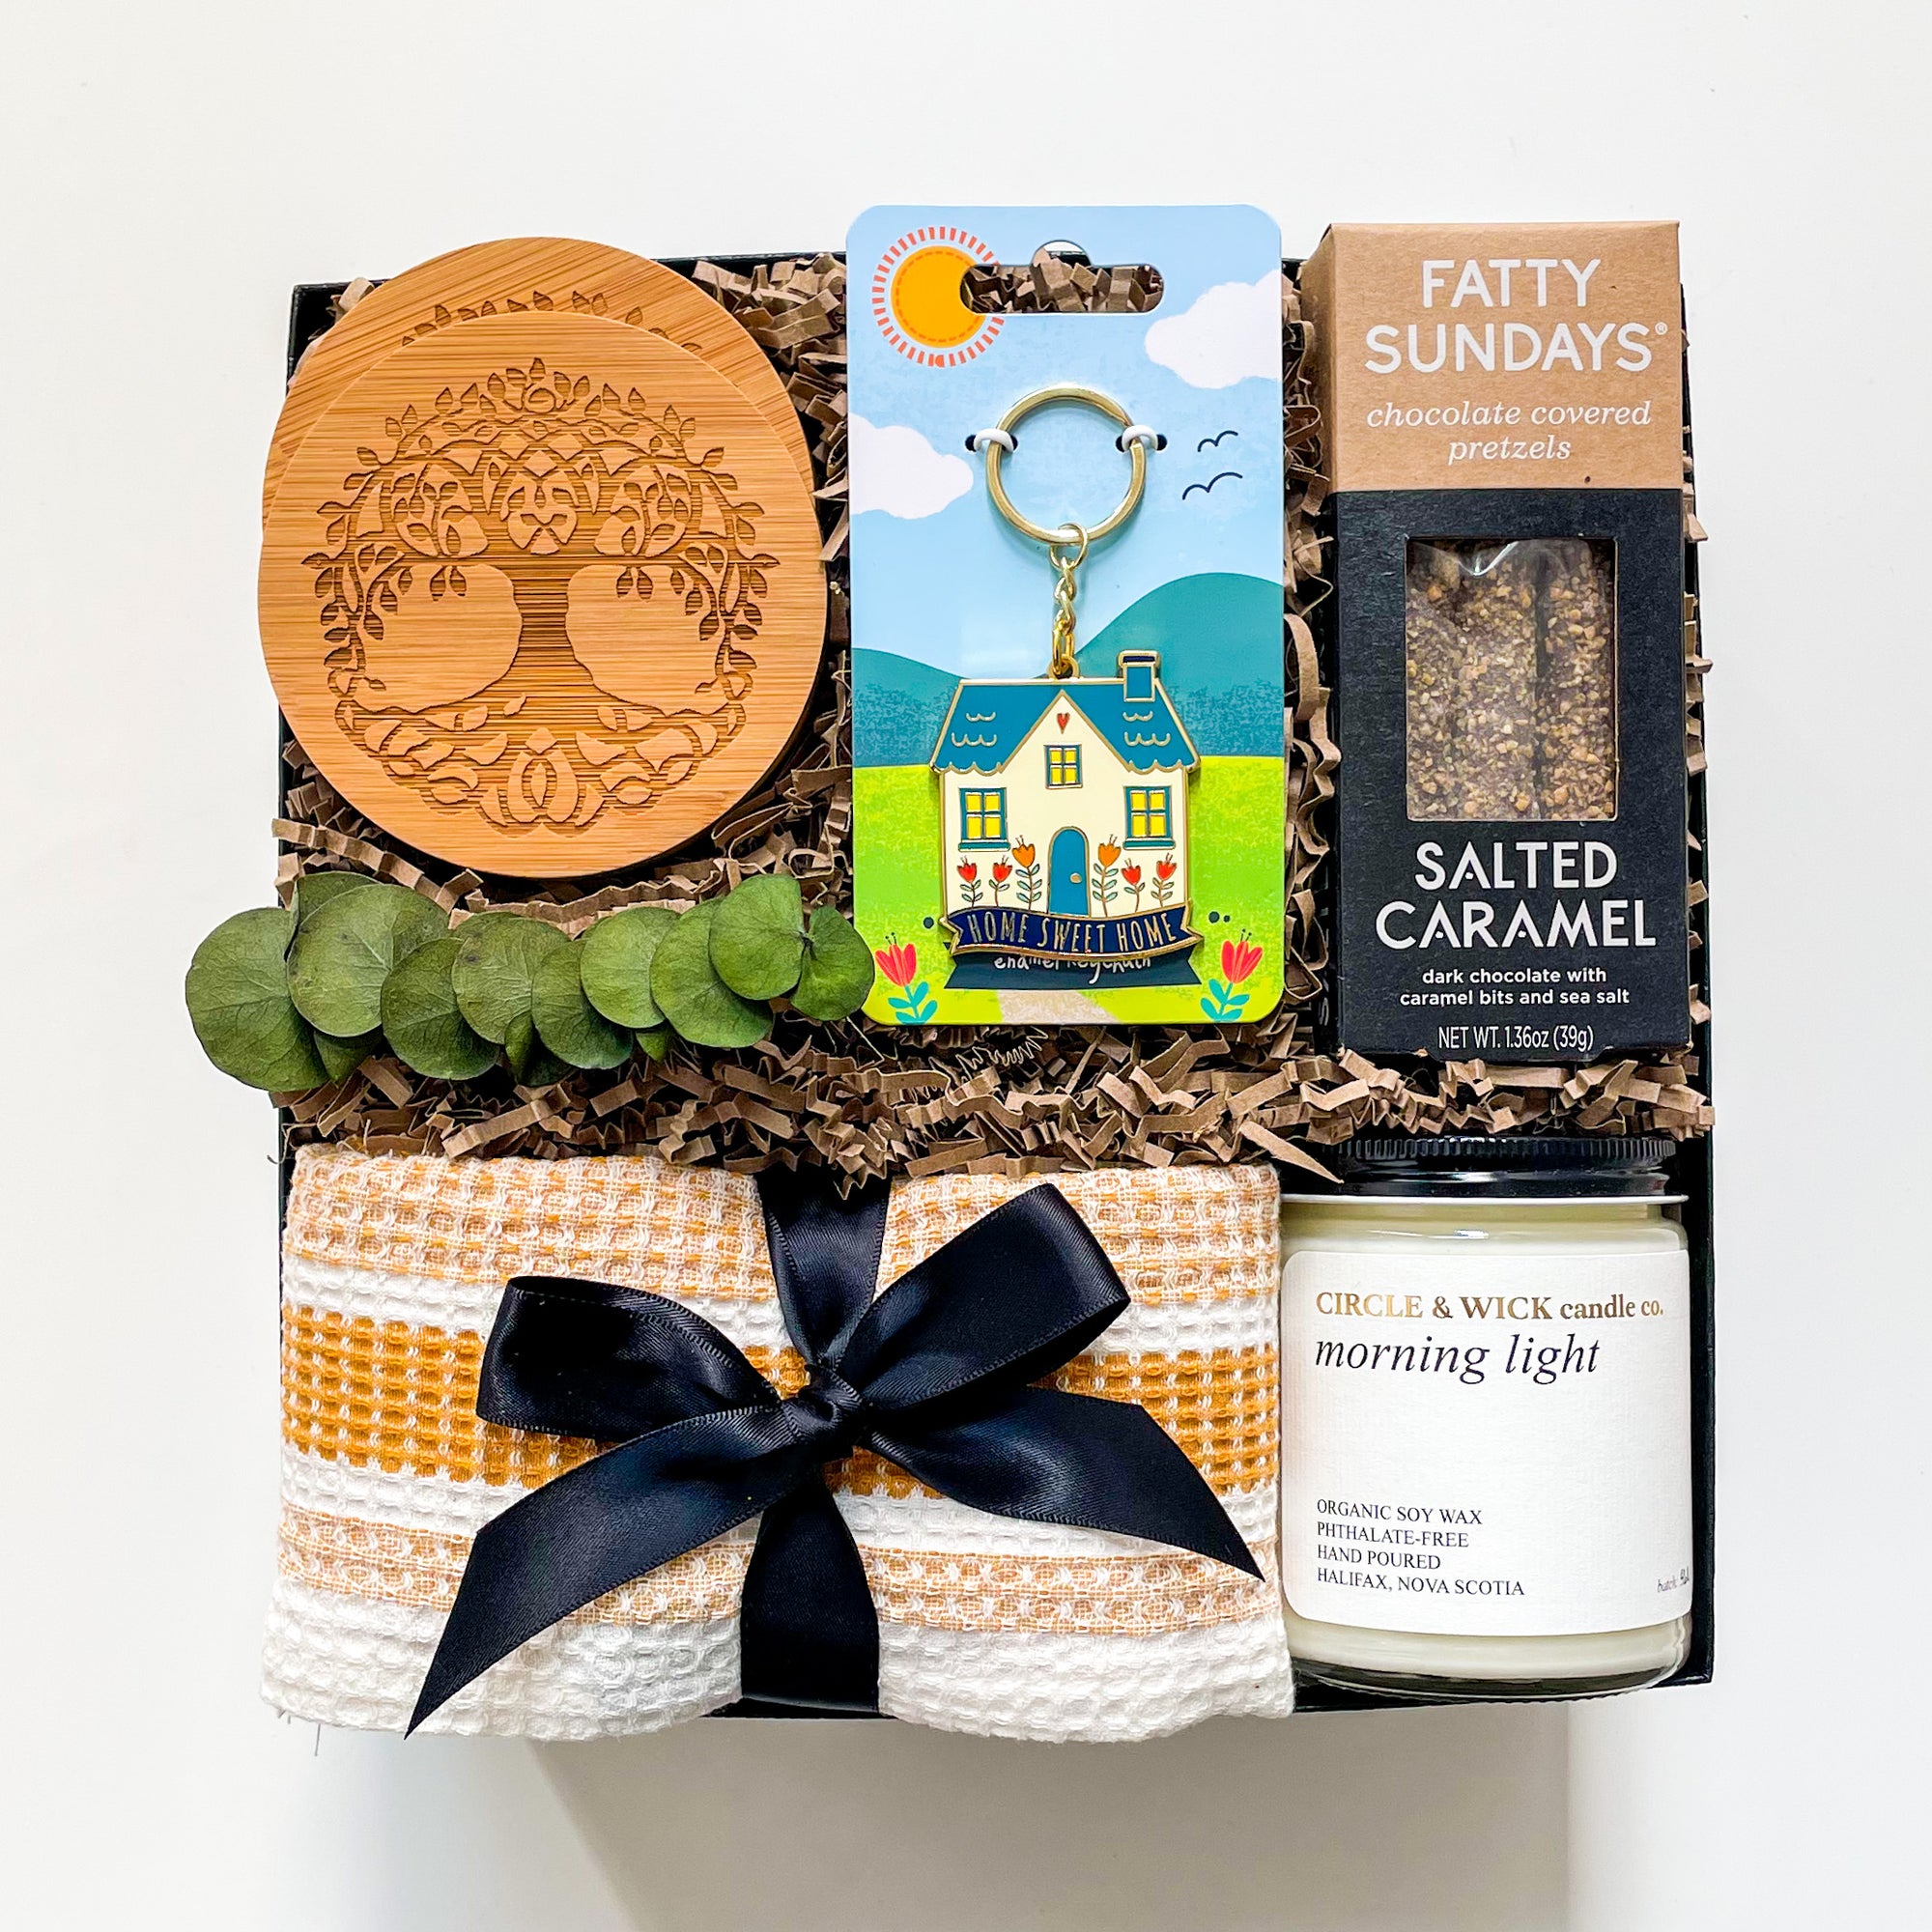 Housewarming Gift, Housewarming Gift Delivery, Shipped Housewarming Gift, New Home Gift, New House Gifts, New Home Gift Delivery, Perfect Housewarming Gift, Welcome Home Gift, Housewarming Gift Box, Housewarming Gift Basket, New Home Gift Basket, New Home Gift Box, New House Gift Basket